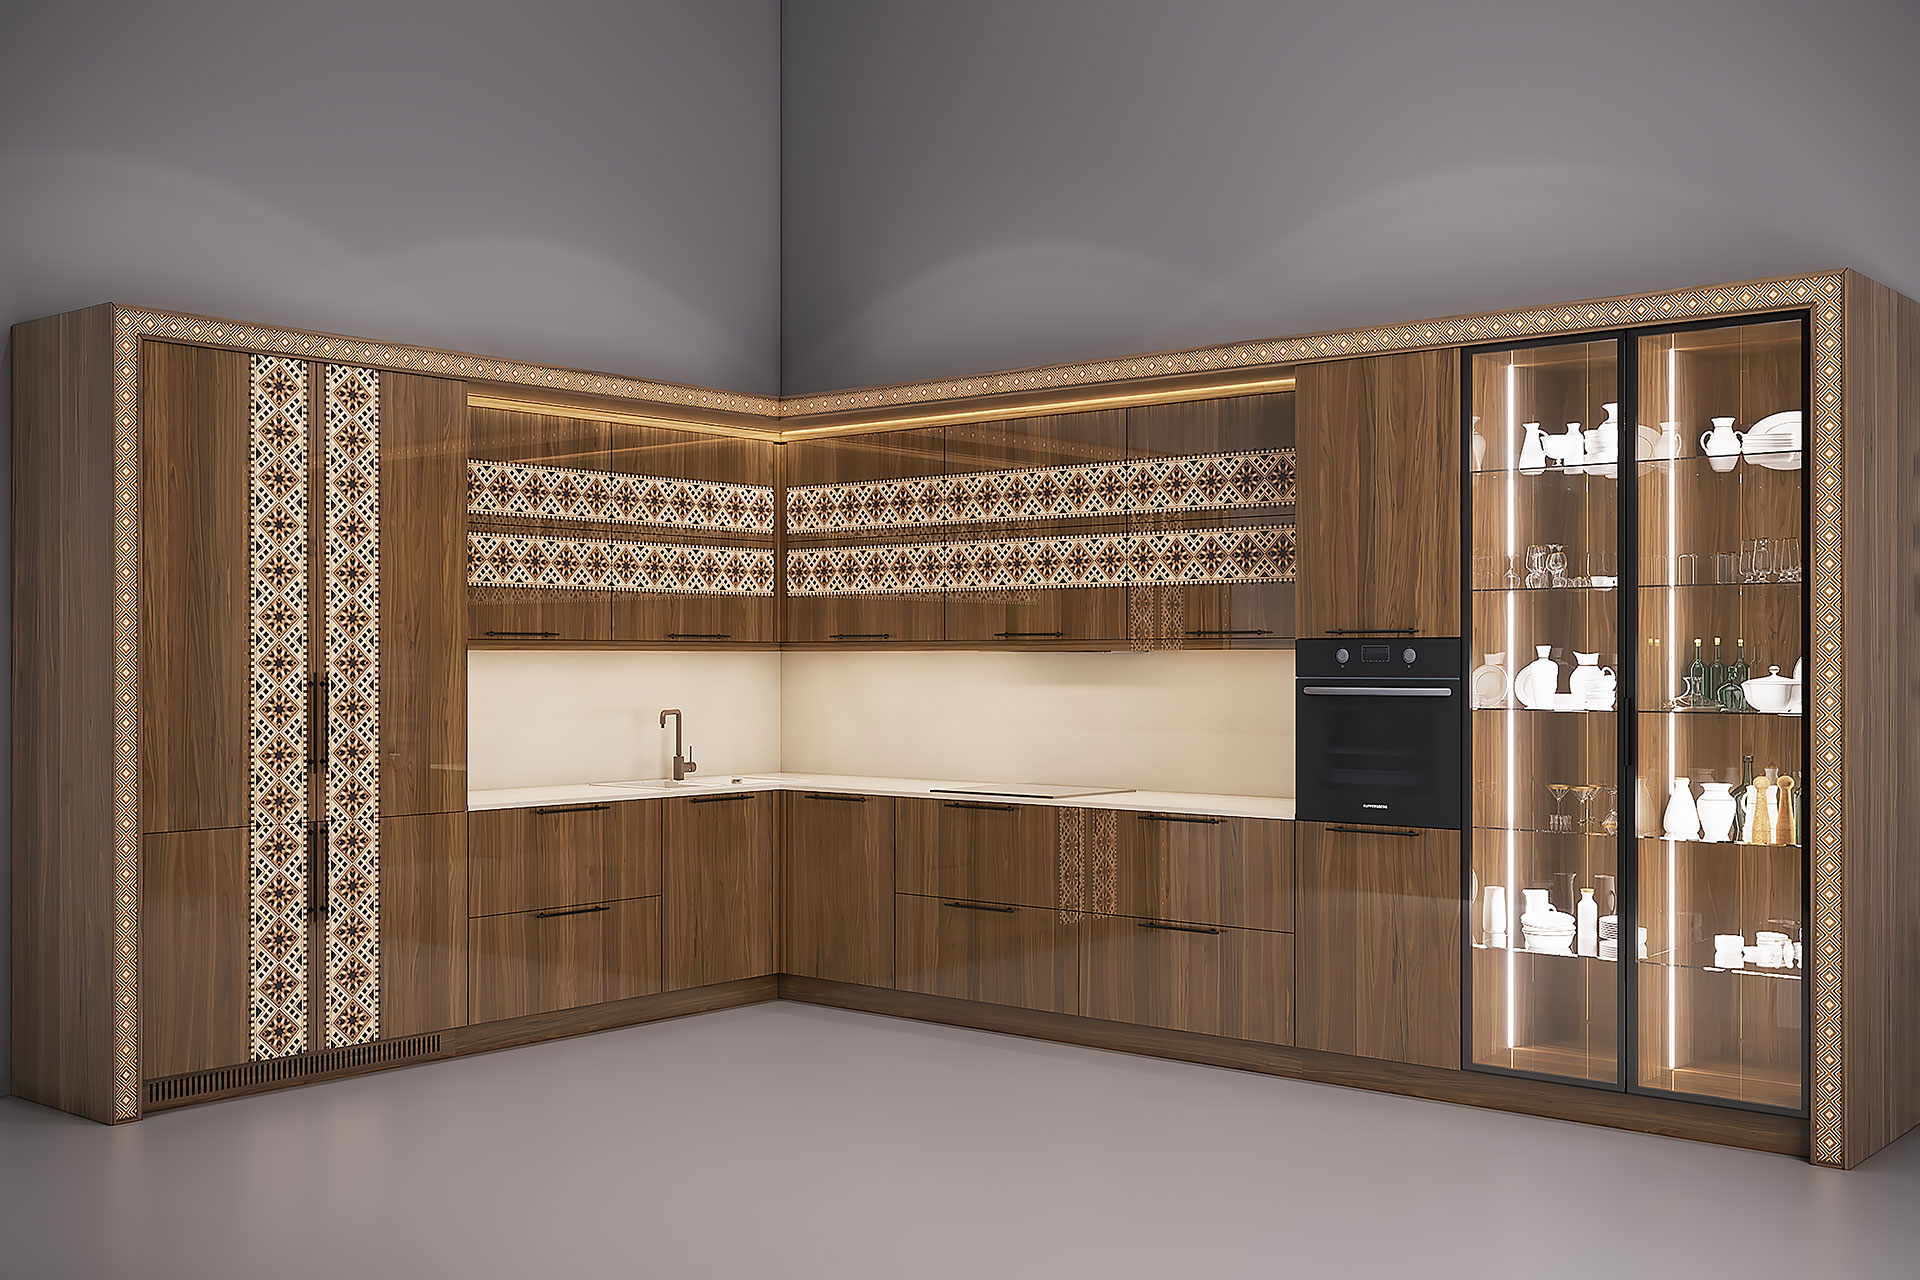 Kitchen with veneer facades with intarsia in the Ukrainian style